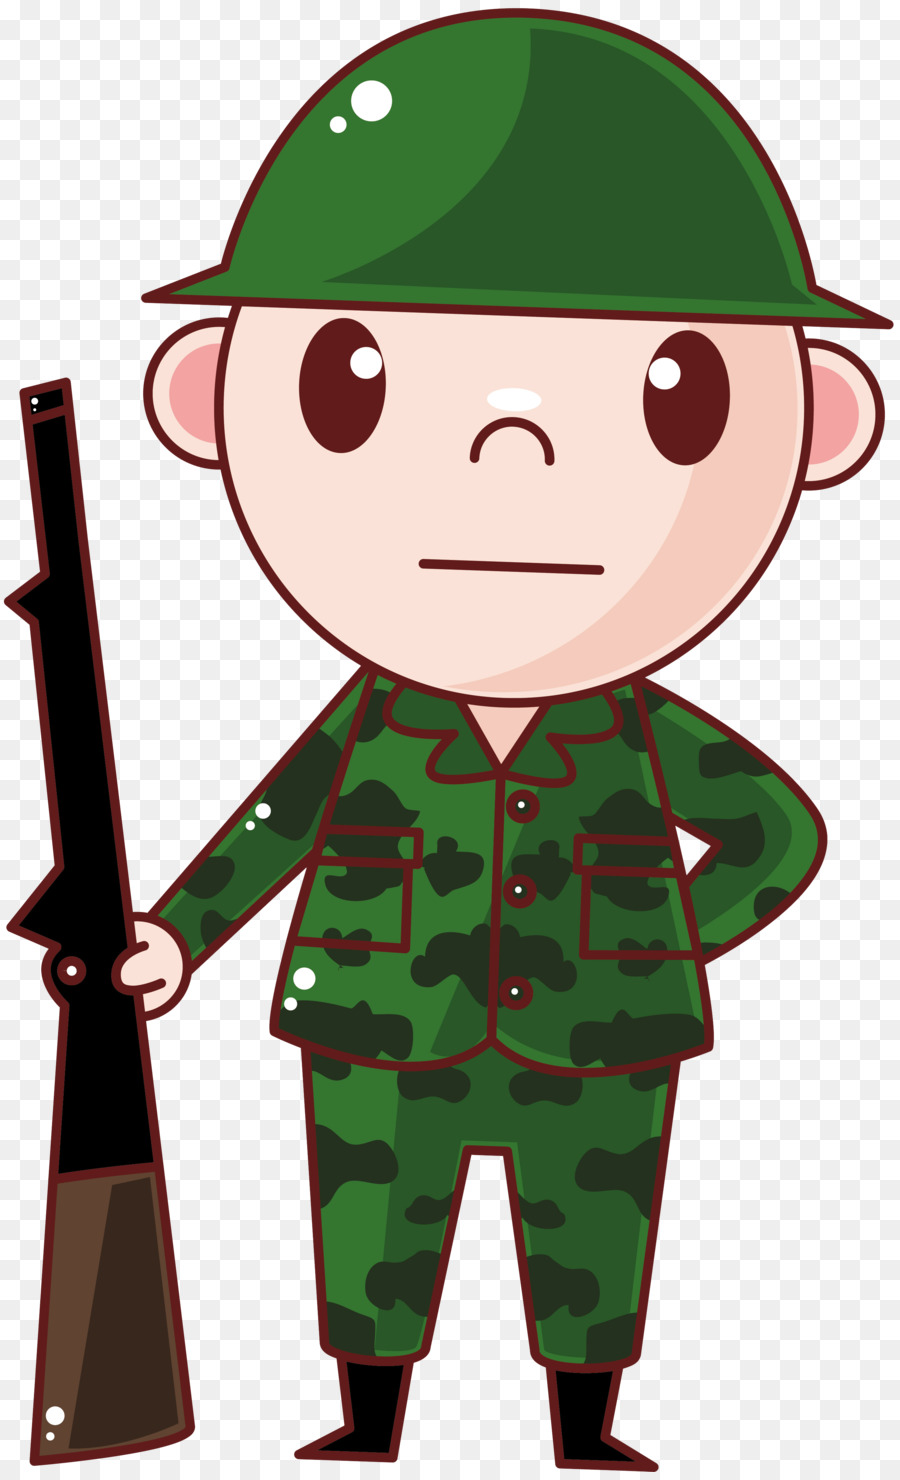 soldiers clipart cartoon